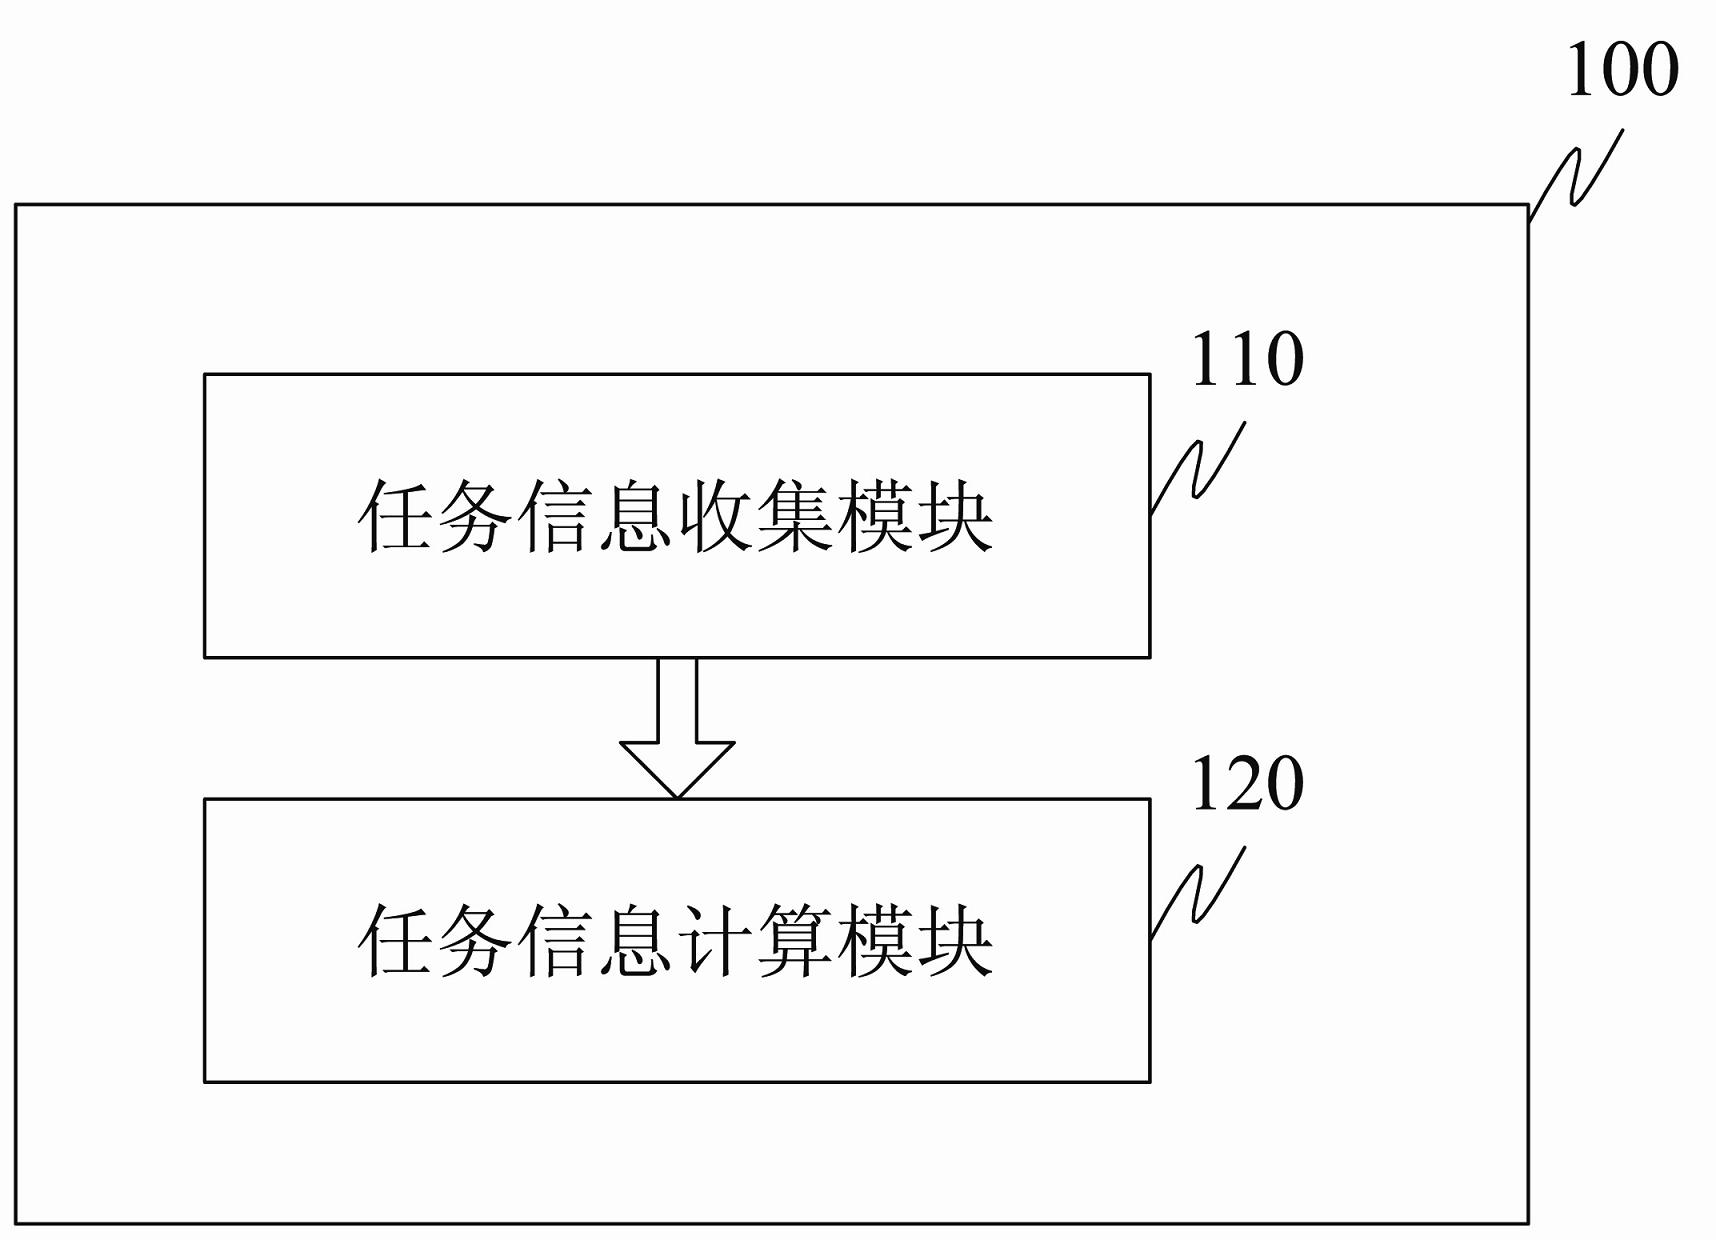 Scheduling, organization and cooperation system and method for multi-robot system